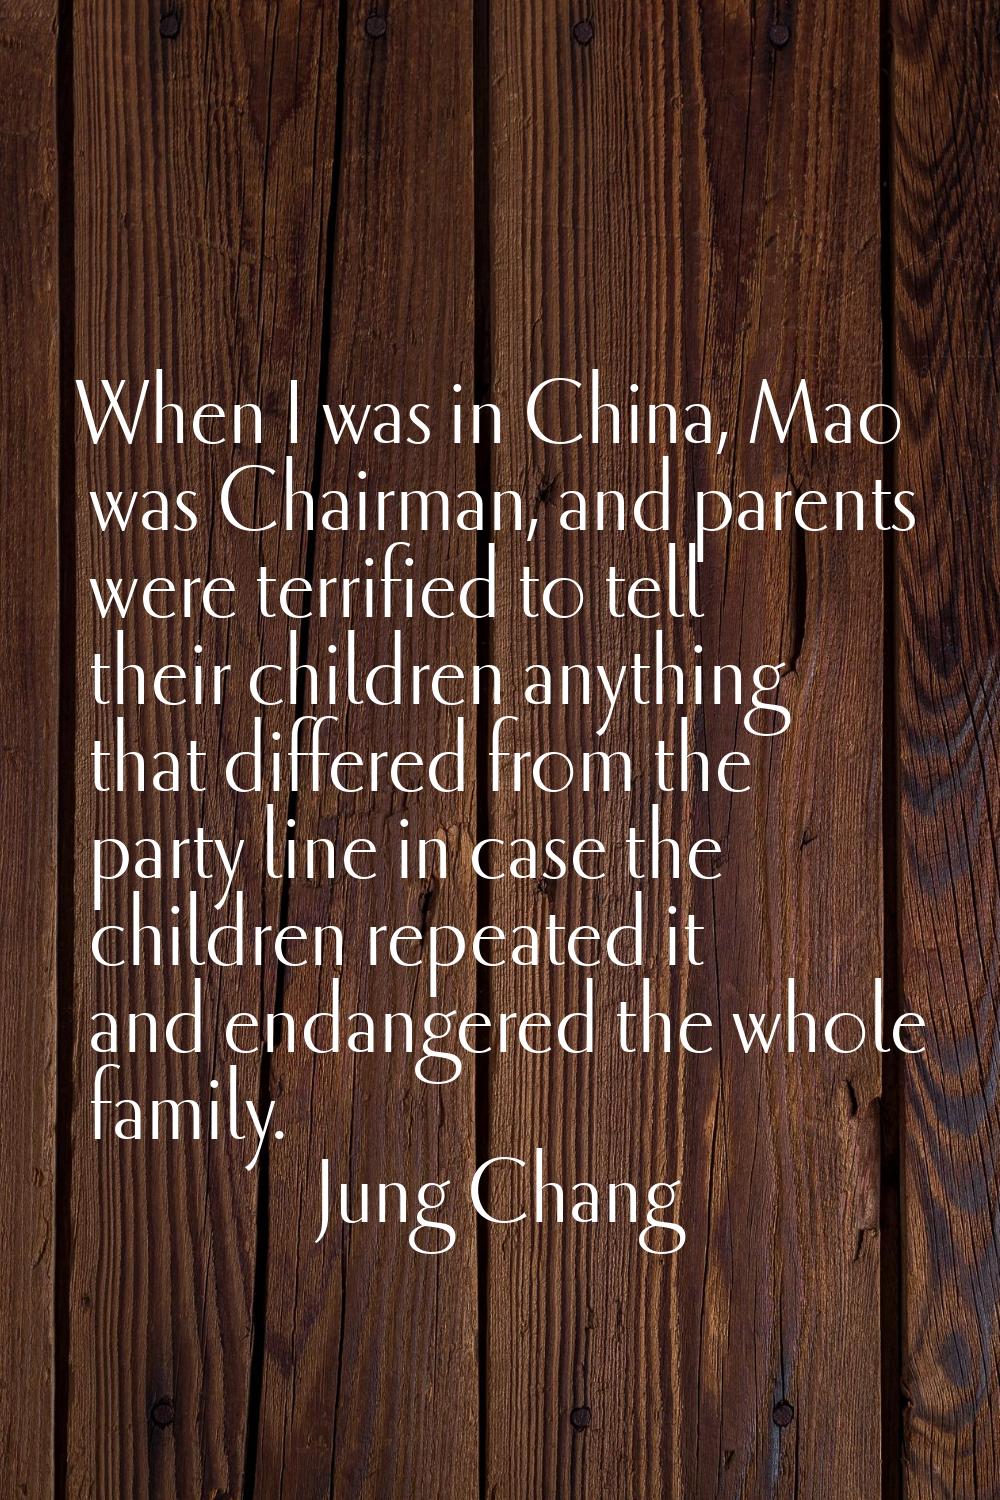 When I was in China, Mao was Chairman, and parents were terrified to tell their children anything t